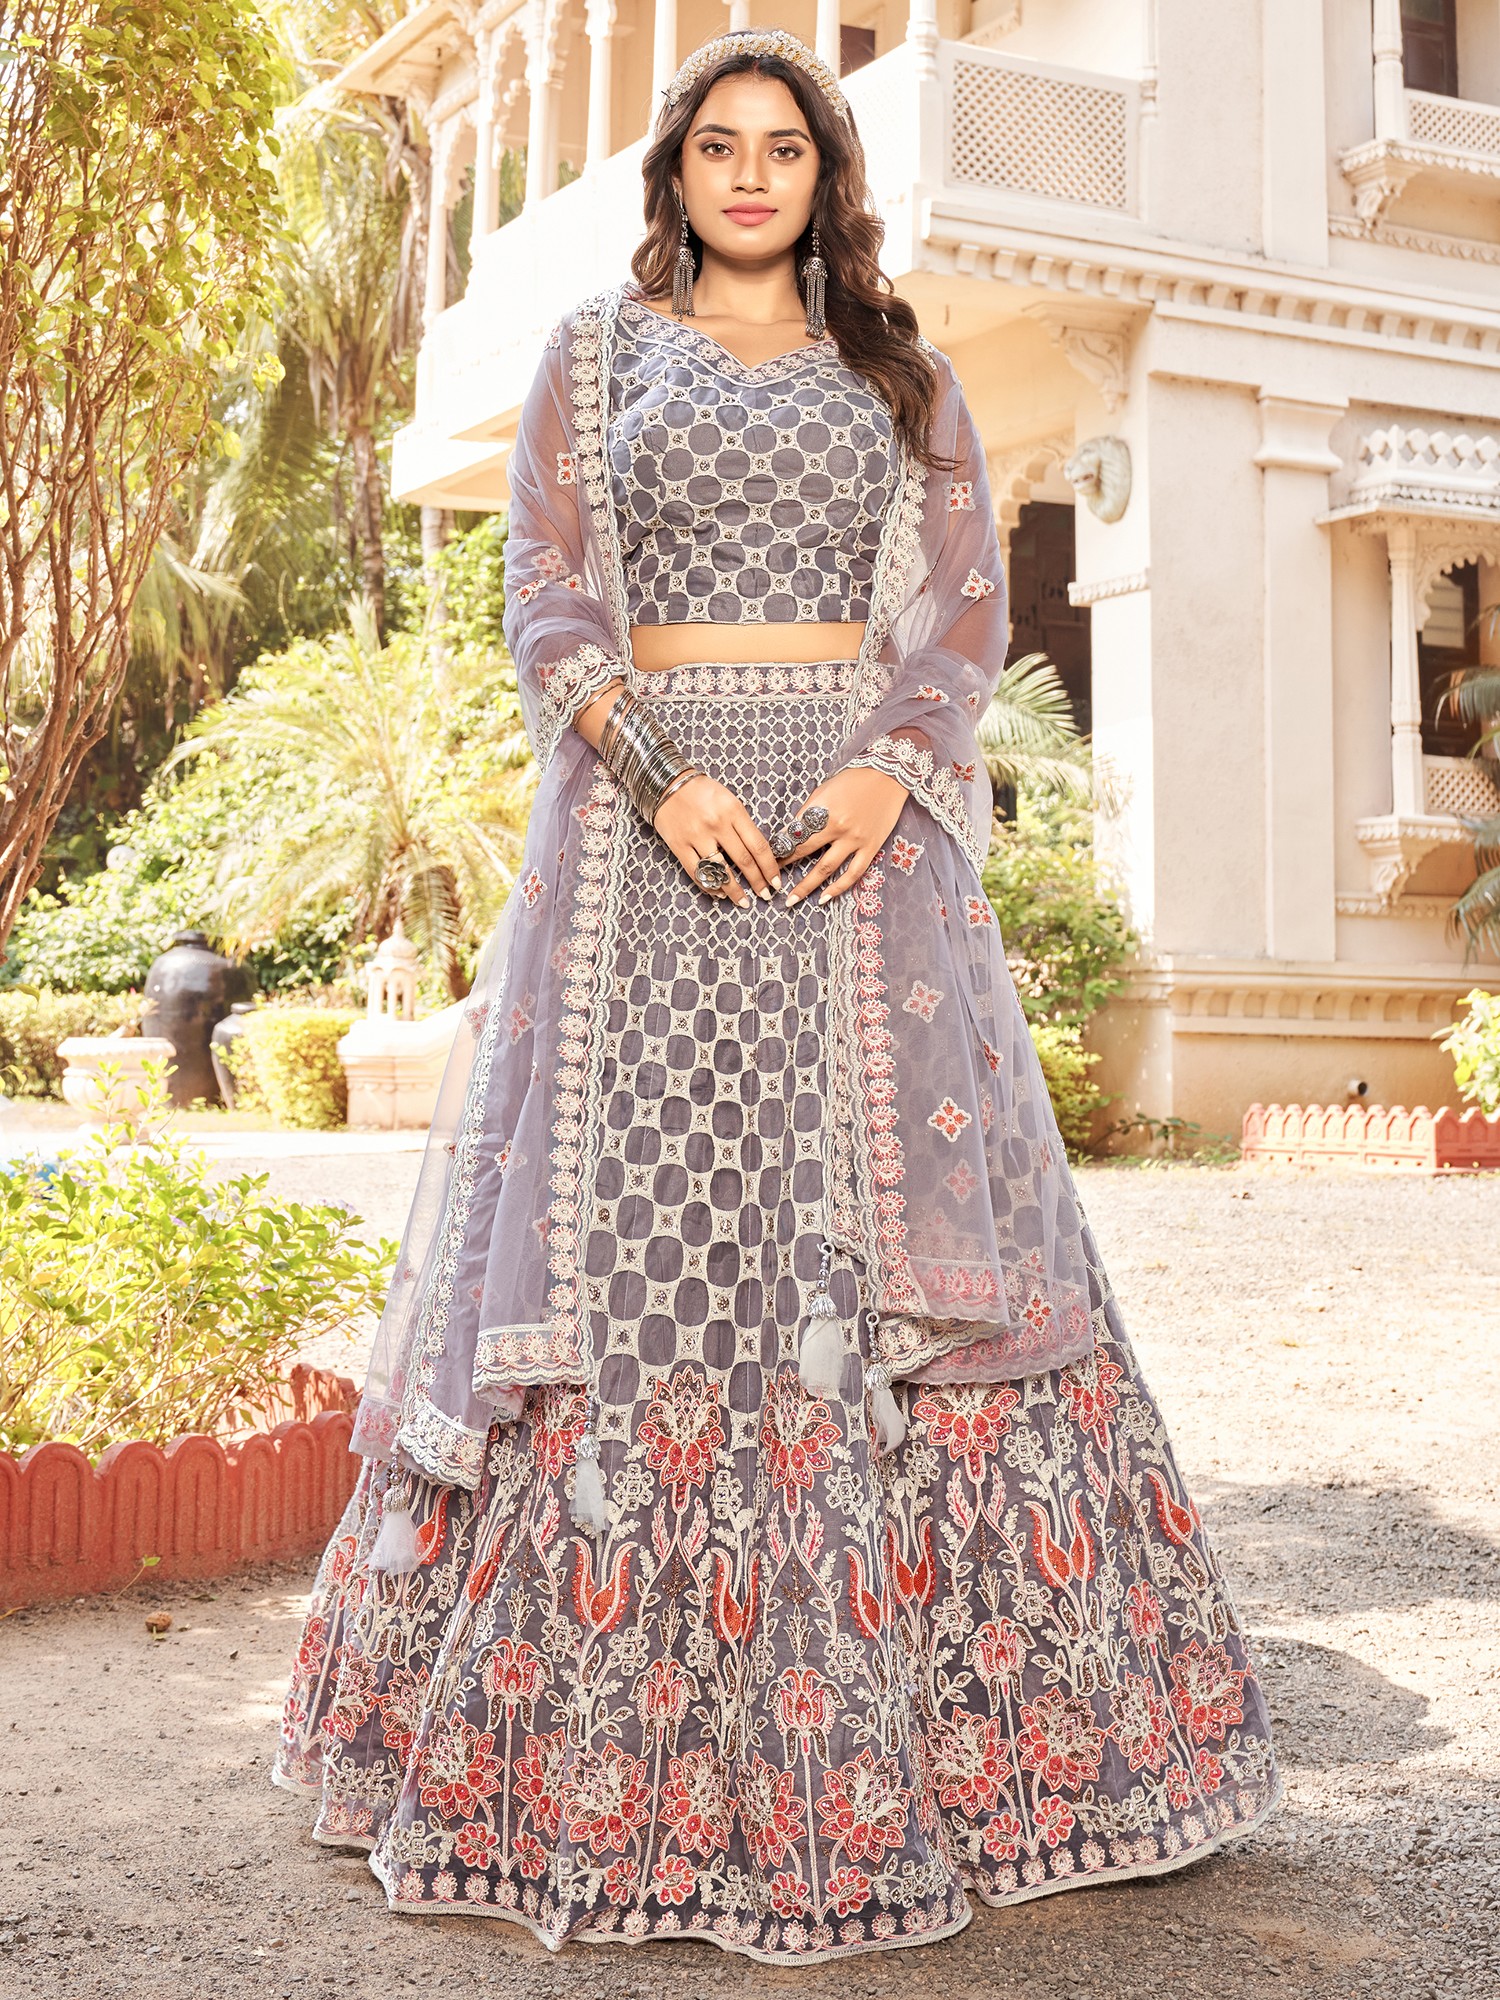 fcity.in - Women Heavy Stitching Patern With Gorgeous Handwork Stiched  Lehenga